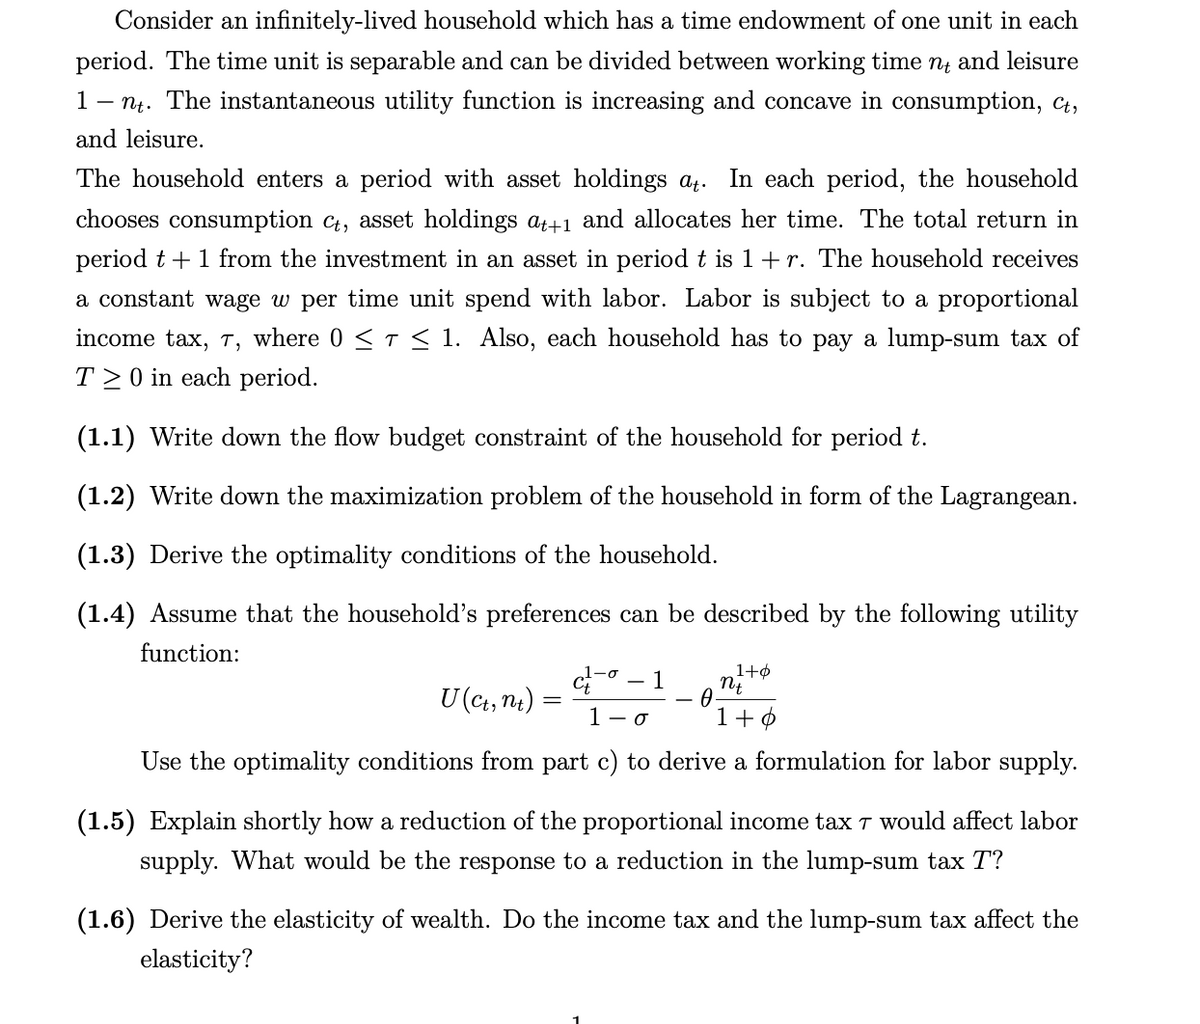 Consider an infinitely-lived household which has a time endowment of one unit in each
period. The time unit is separable and can be divided between working time nt and leisure
1 nt. The instantaneous utility function is increasing and concave in consumption, Ct,
and leisure.
The household enters a period with asset holdings at. In each period, the household
chooses consumption ct, asset holdings at+1 and allocates her time. The total return in
period t + 1 from the investment in an asset in period t is 1 + r. The household receives
a constant wage w per time unit spend with labor. Labor is subject to a proportional
income tax, 7, where 0 ≤ T ≤ 1. Also, each household has to pay a lump-sum tax of
T20 in each period.
(1.1) Write down the flow budget constraint of the household for period t.
(1.2) Write down the maximization problem of the household in form of the Lagrangean.
(1.3) Derive the optimality conditions of the household.
(1.4) Assume that the household's preferences can be described by the following utility
function:
nt
1 - 0
1+0
Use the optimality conditions from part c) to derive a formulation for labor supply.
U (Ct, nt)
=
-σ
1
0
1+6
(1.5) Explain shortly how a reduction of the proportional income tax 7 would affect labor
supply. What would be the response to a reduction in the lump-sum tax T?
(1.6) Derive the elasticity of wealth. Do the income tax and the lump-sum tax affect the
elasticity?